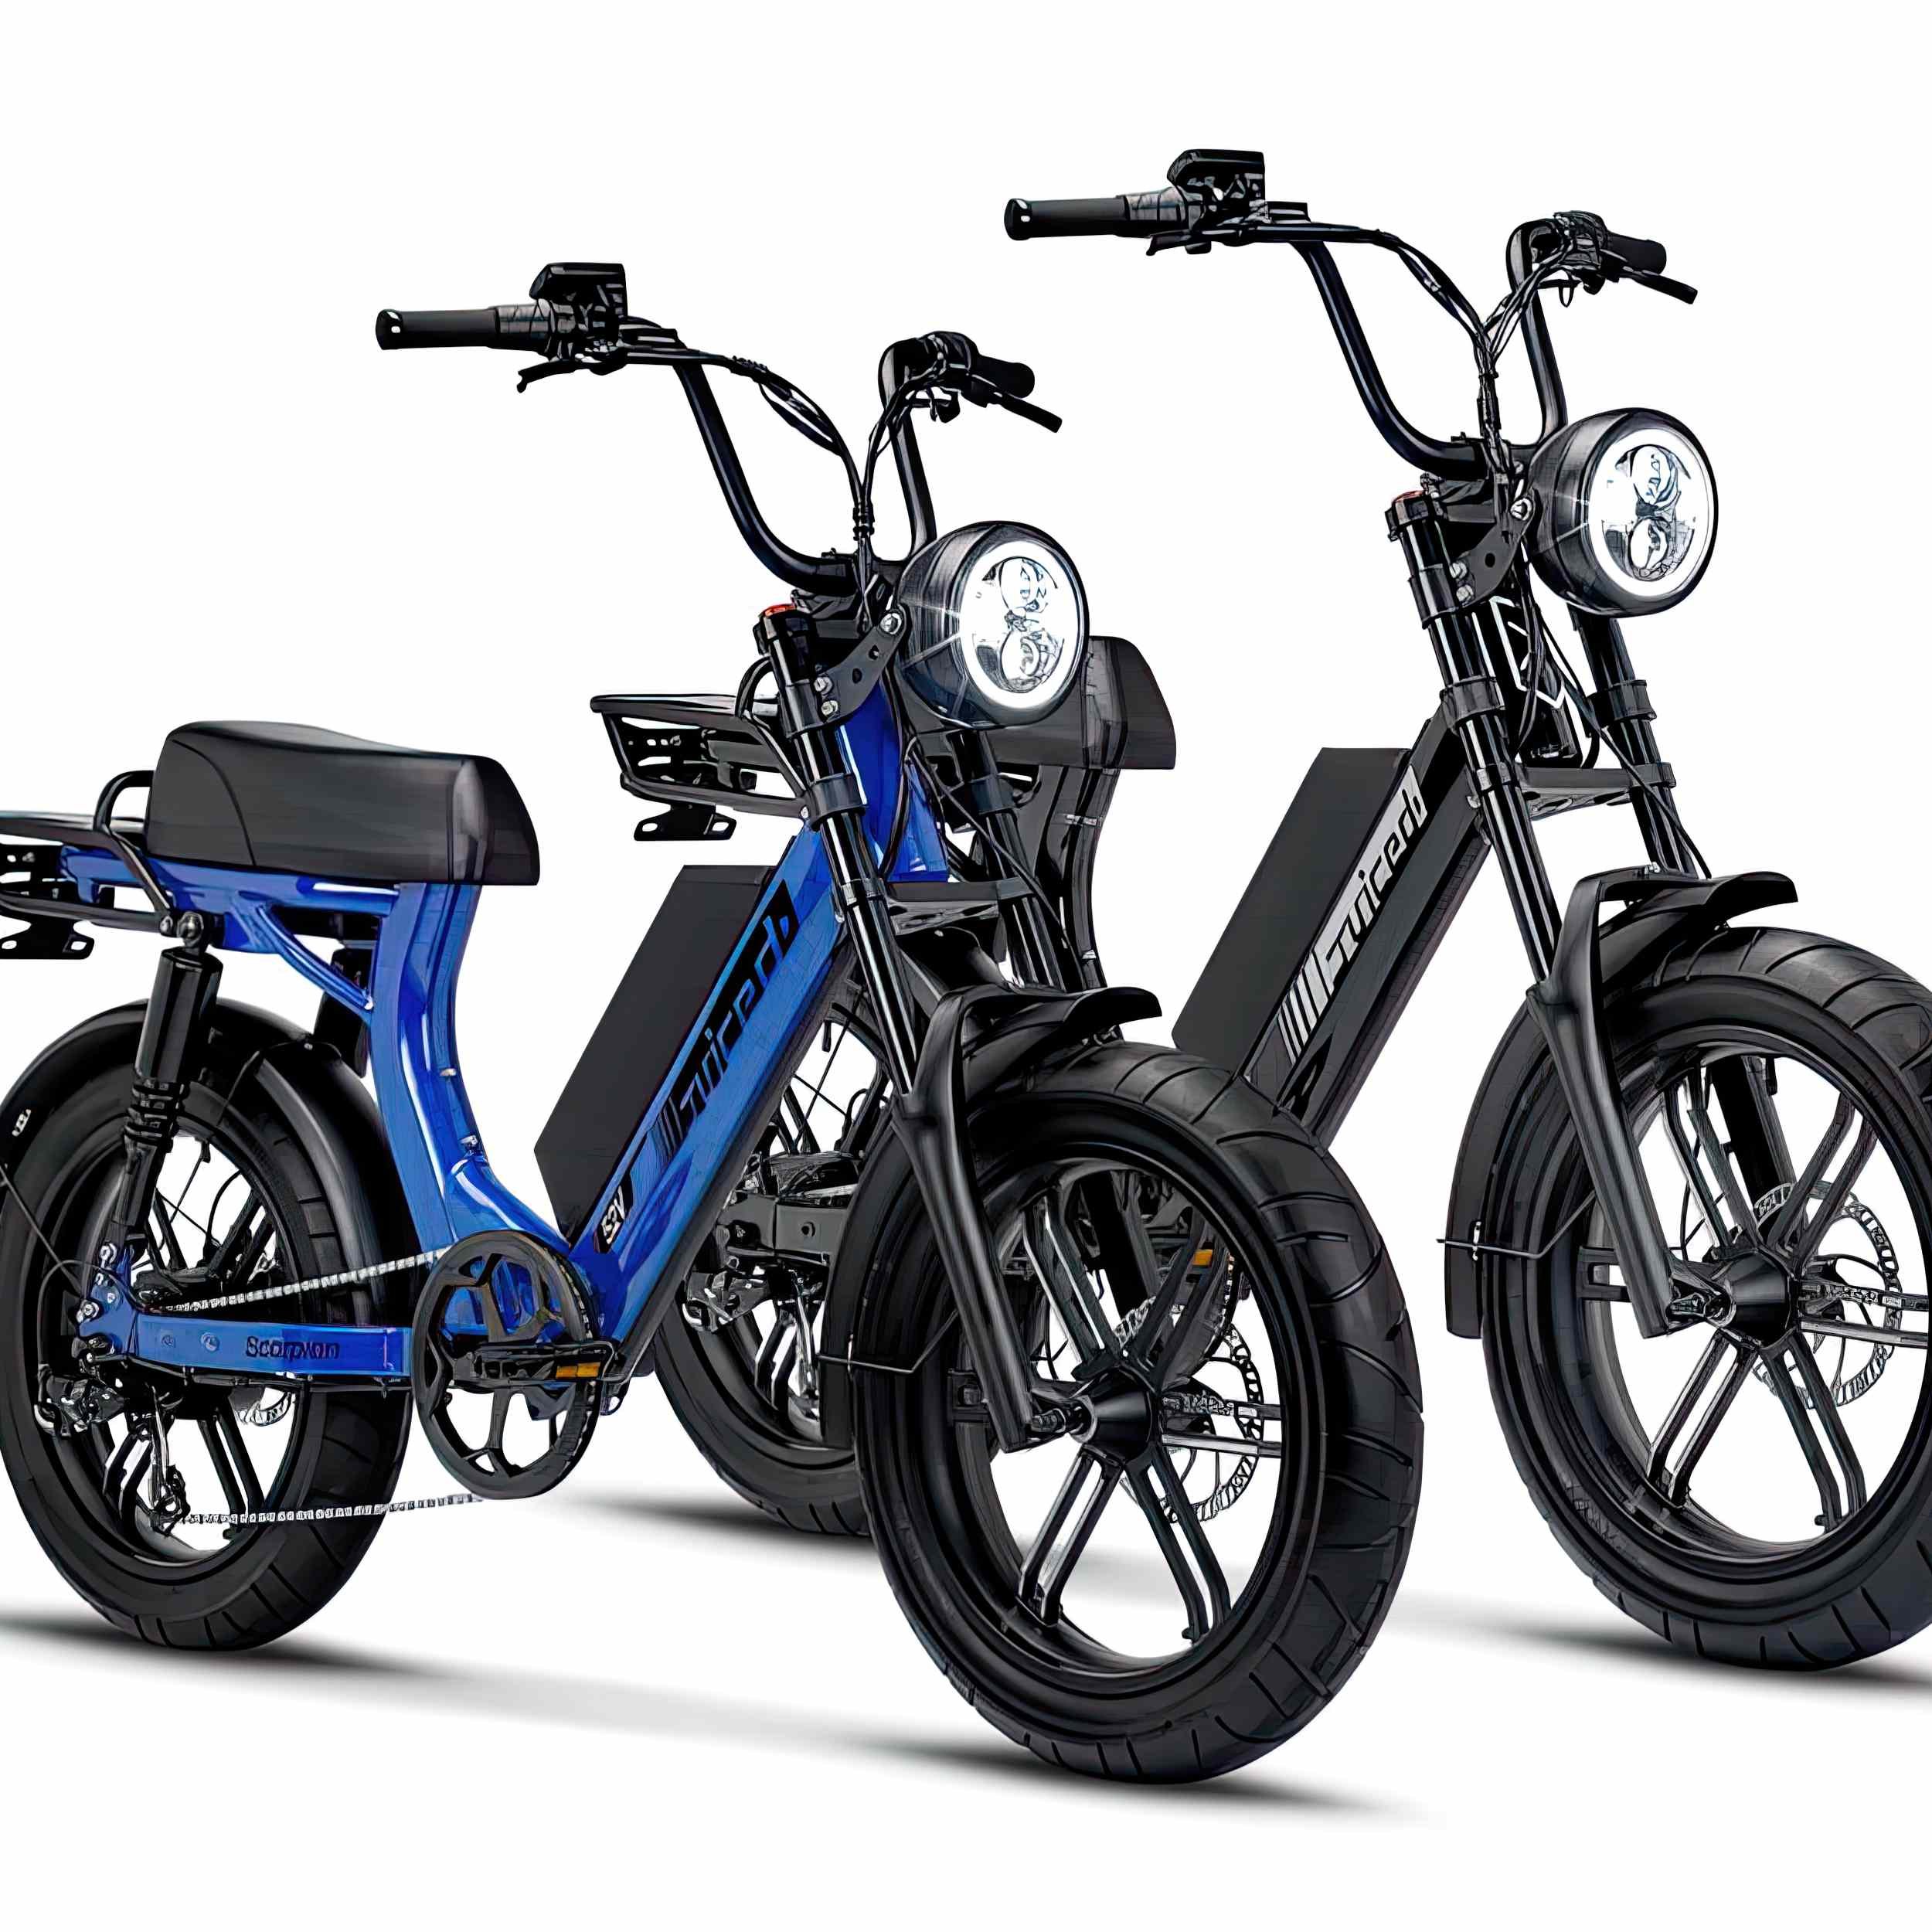  The Scorpion is a moped-style step-through E-Bike with an open-top frame that houses a massive 52-volt battery capable of speeds up to 30mph over a 70-mile max range.  